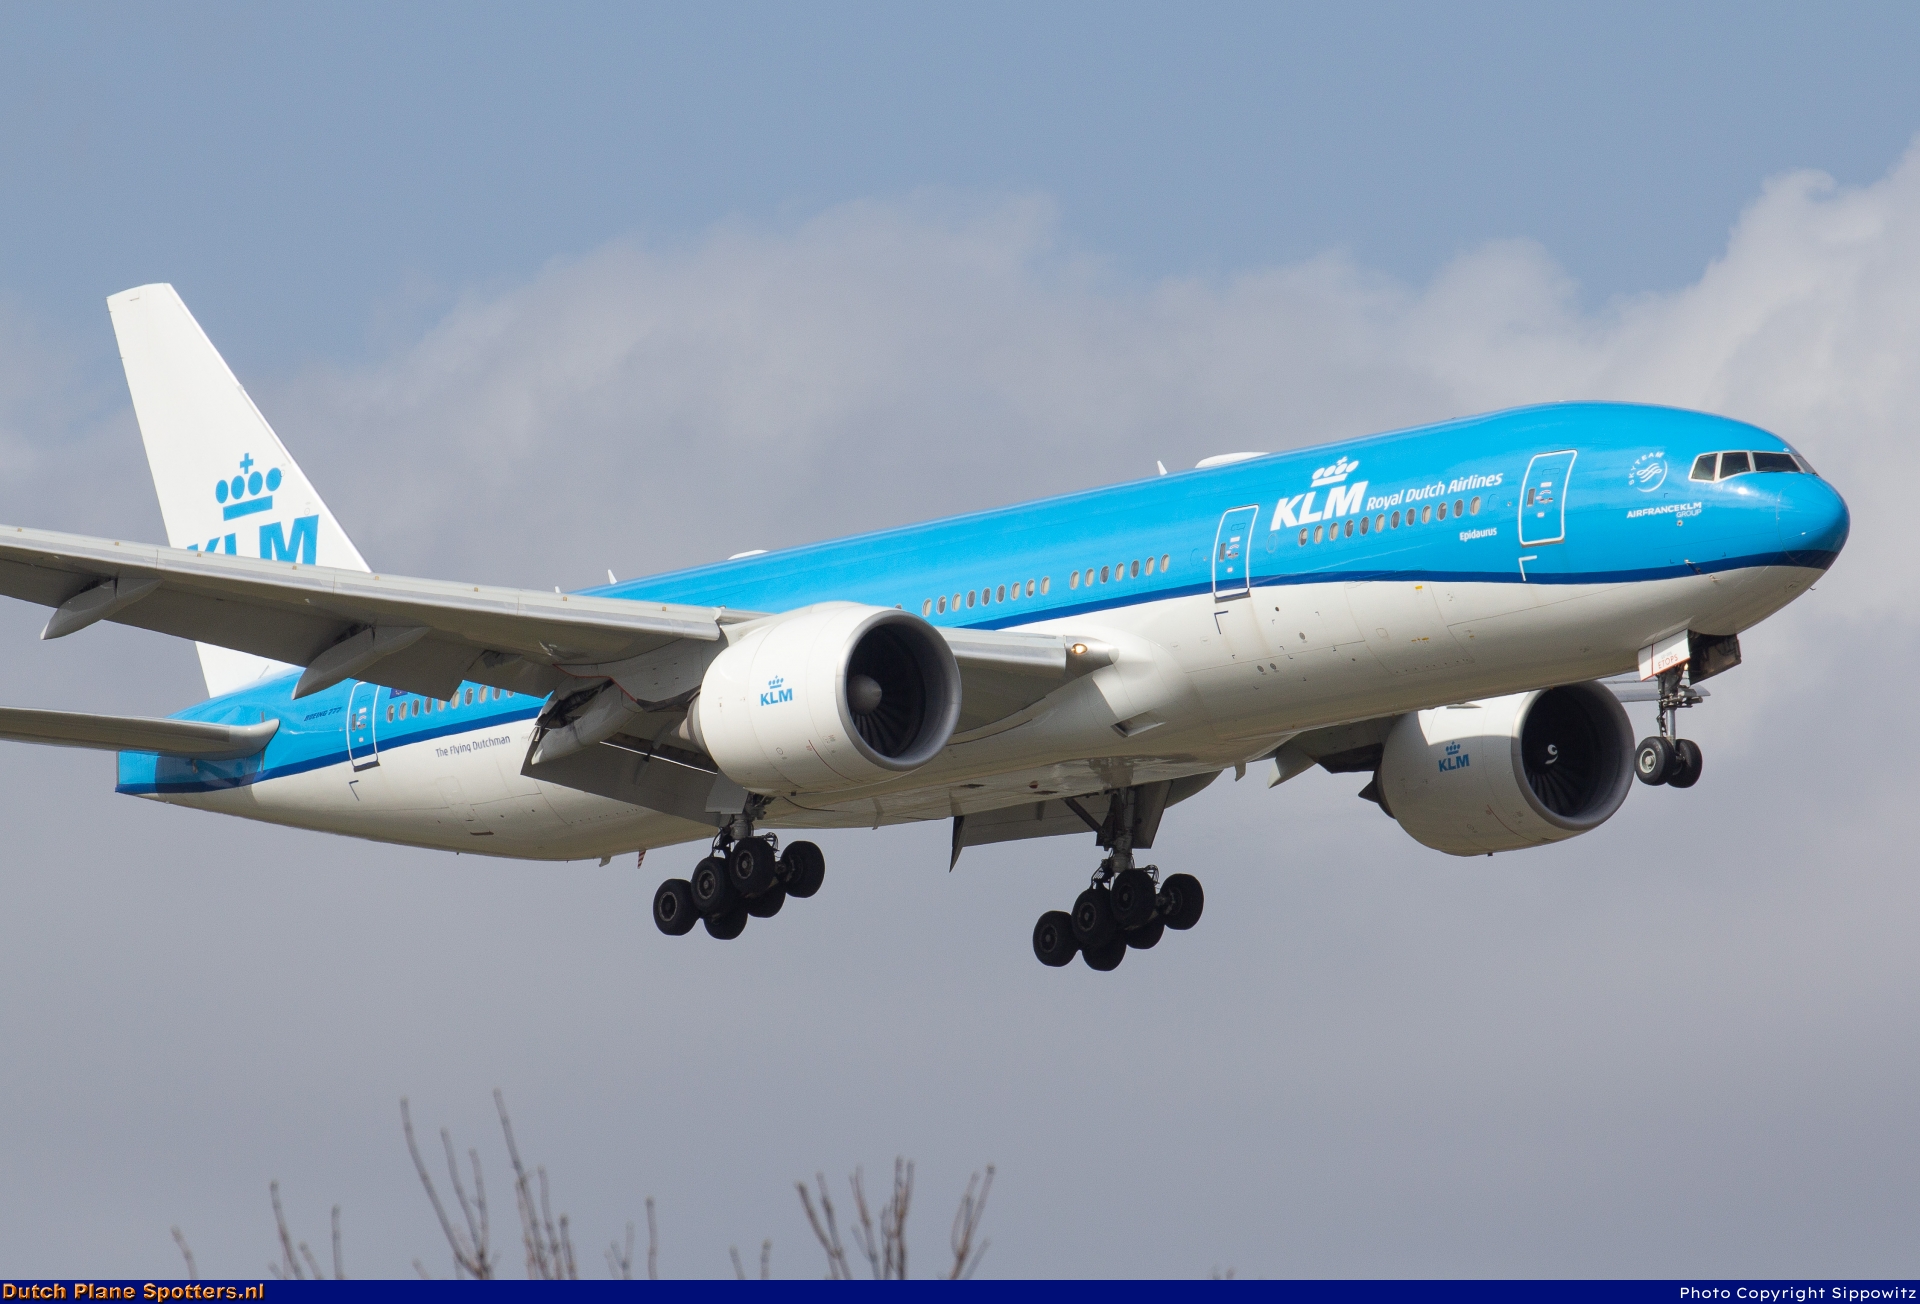 PH-BQE Boeing 777-200 KLM Royal Dutch Airlines by Sippowitz